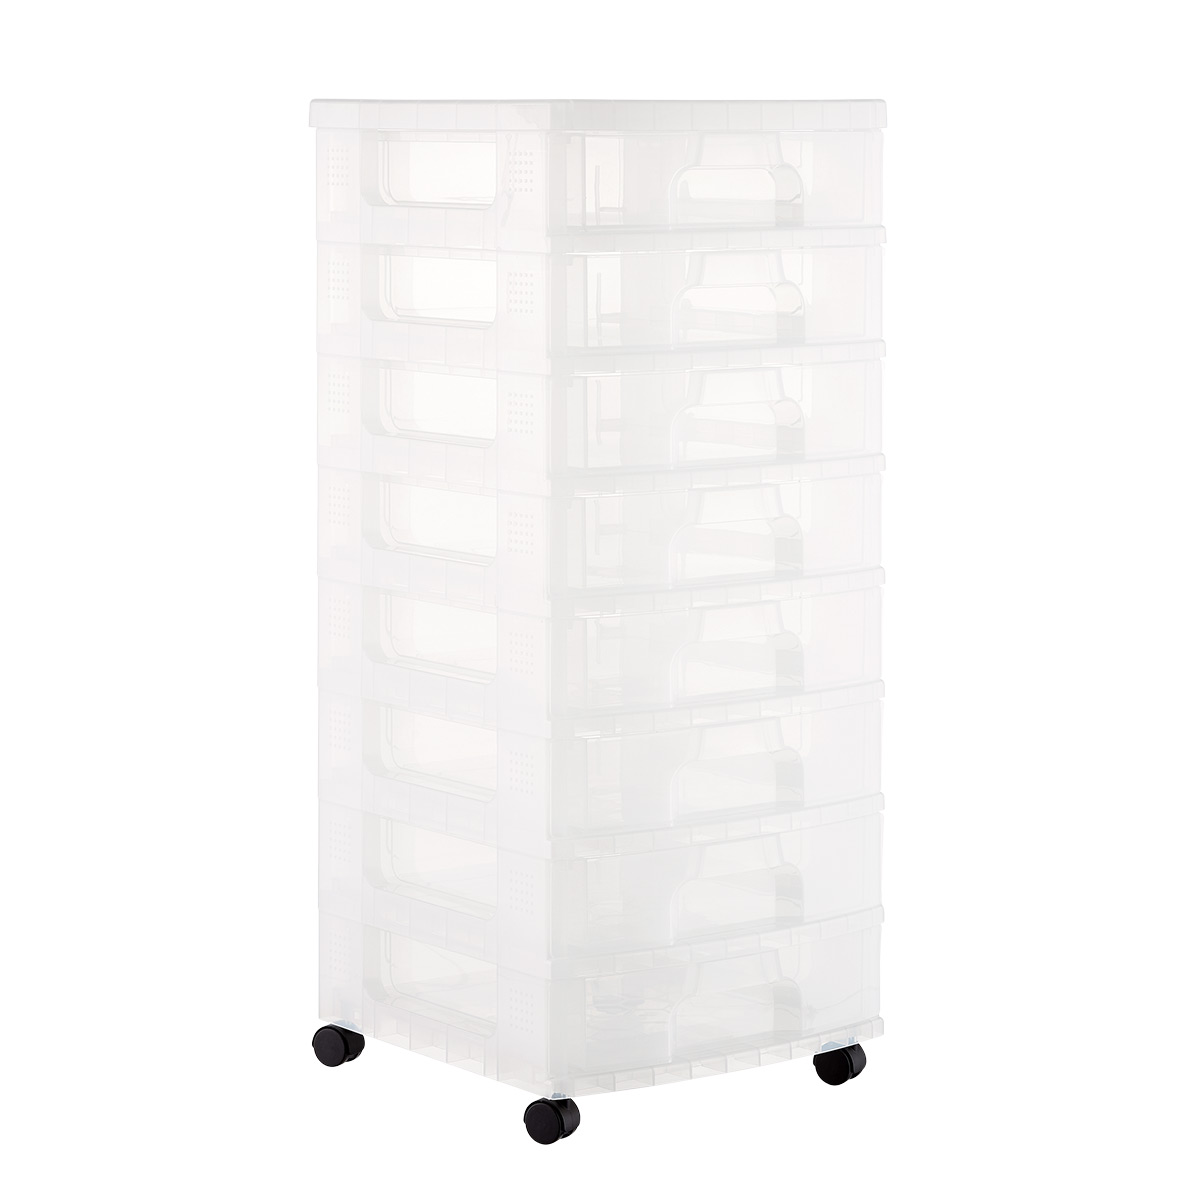 https://www.containerstore.com/catalogimages/387216/10080604-8-drawer-rolling-chest-clea.jpg